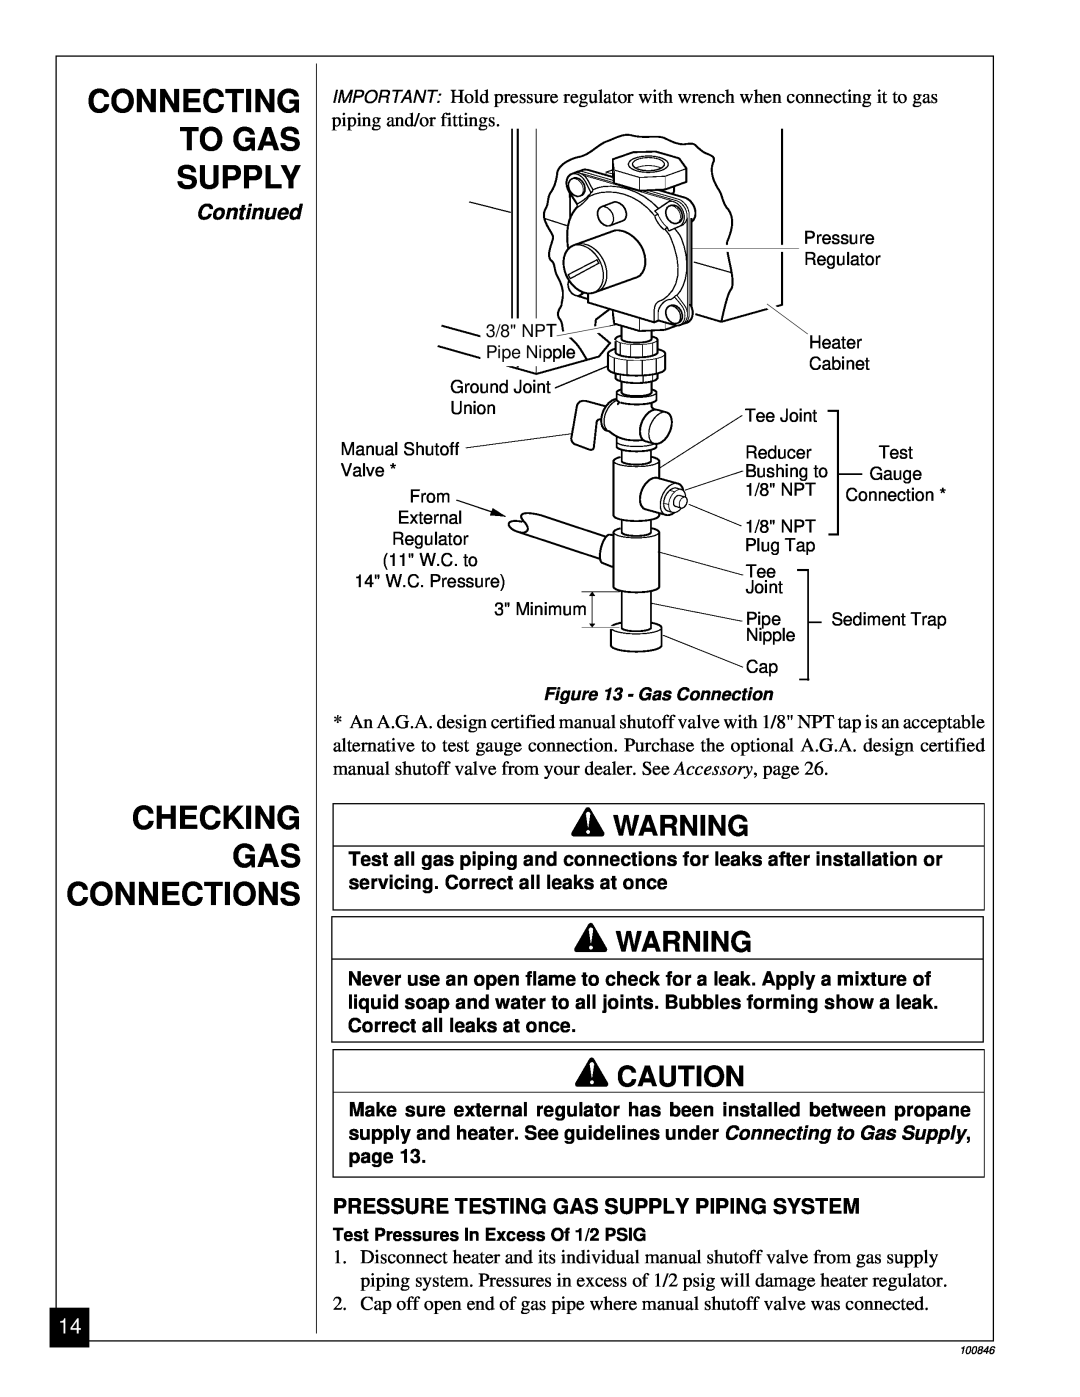 Desa CGP11A installation manual Checking, Connections, Connecting, To Gas, Supply, Continued, piping and/or fittings 